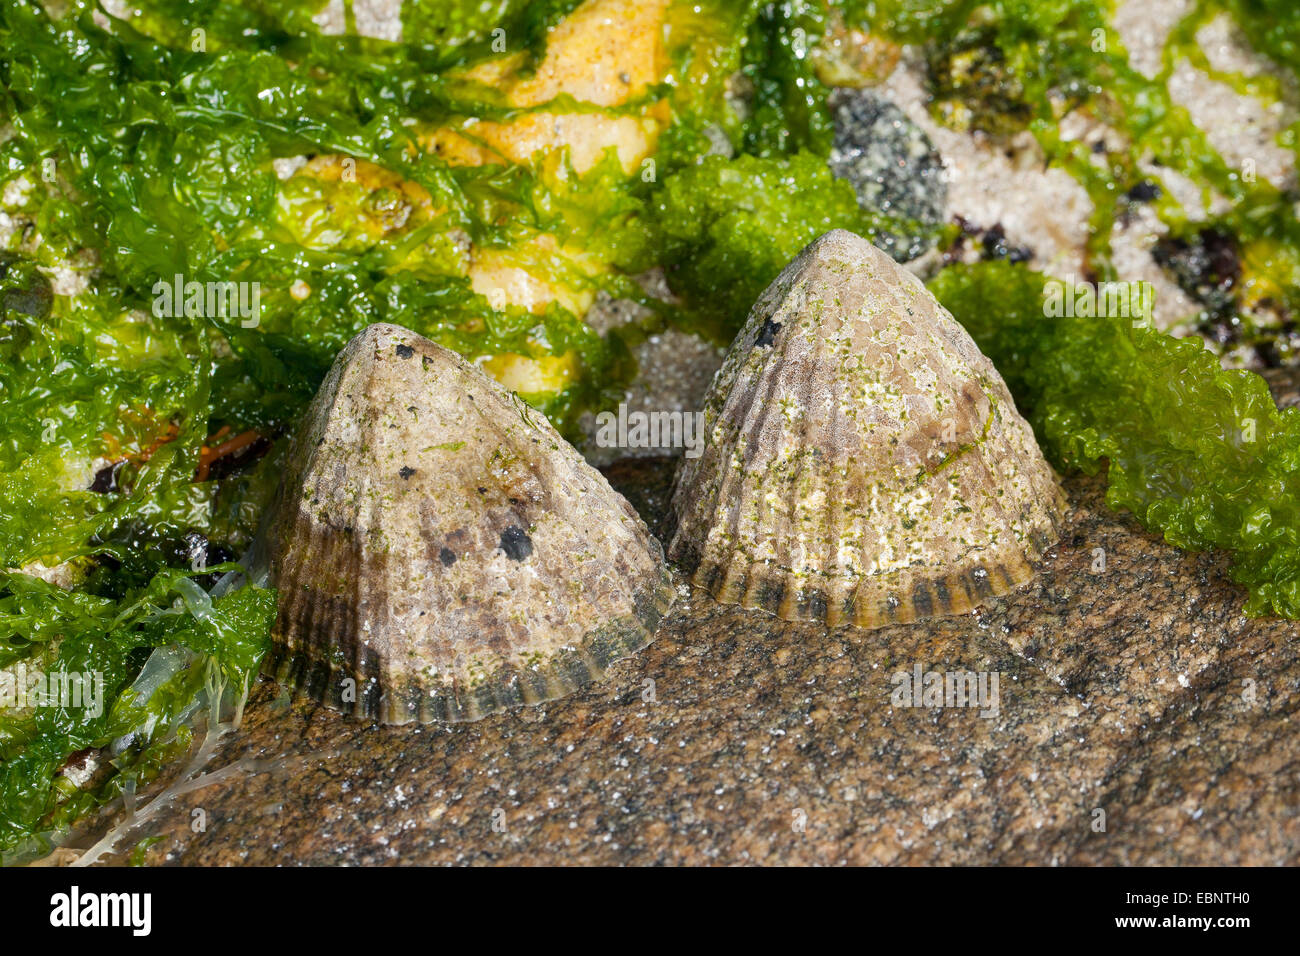 Common limpet, Common European limpet (Patella vulgata), two limpets at ebb-tide on a rock, Germany Stock Photo